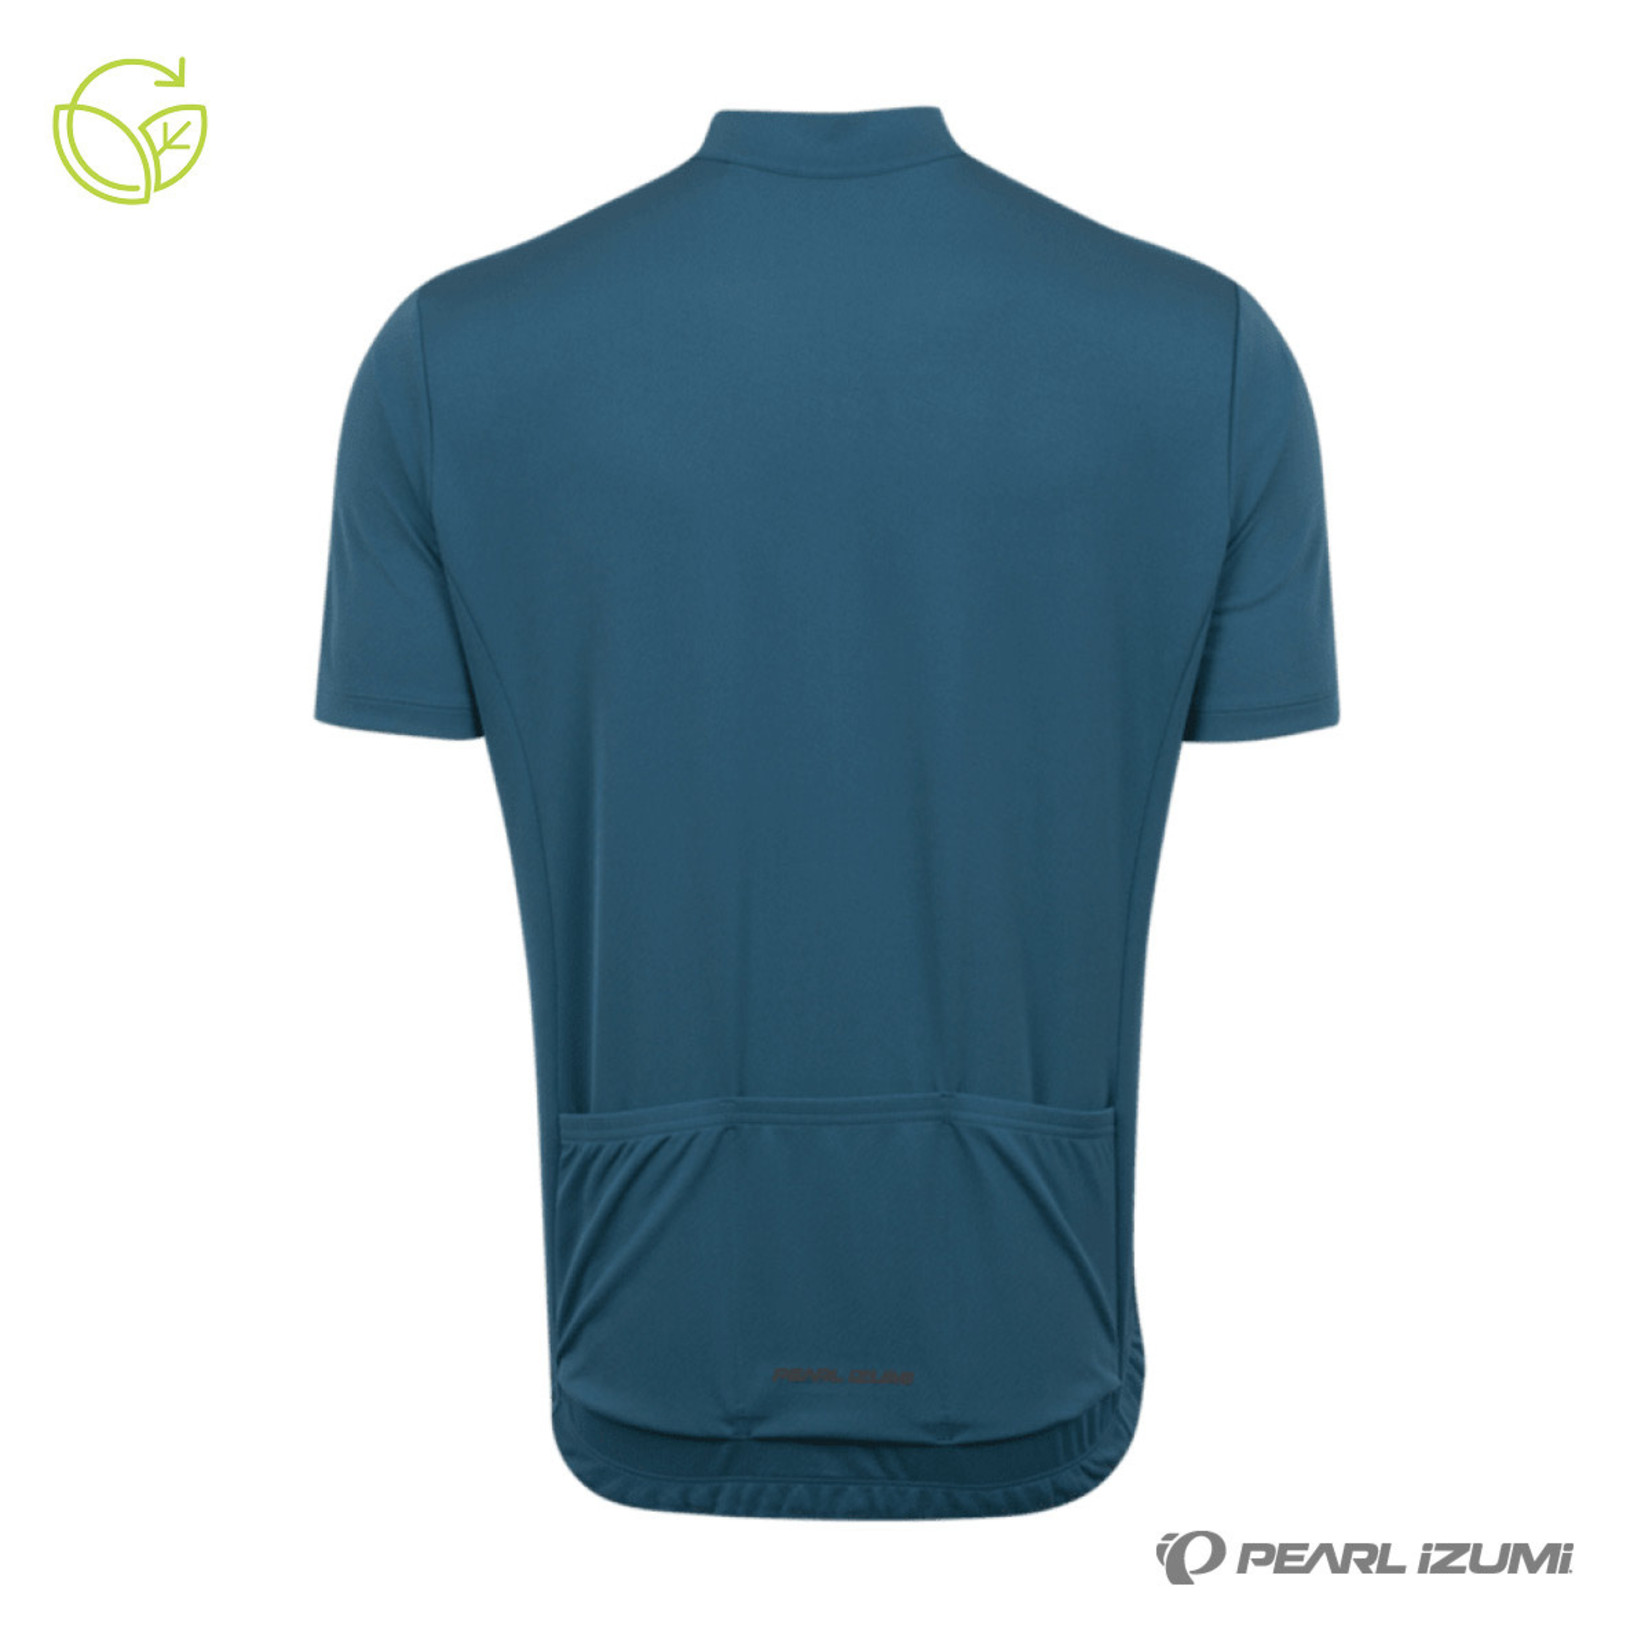 Pearl Izumi Pearl Izumi Quest Short Sleeve Jersey - Ocean Blue - 50% Recycled Material